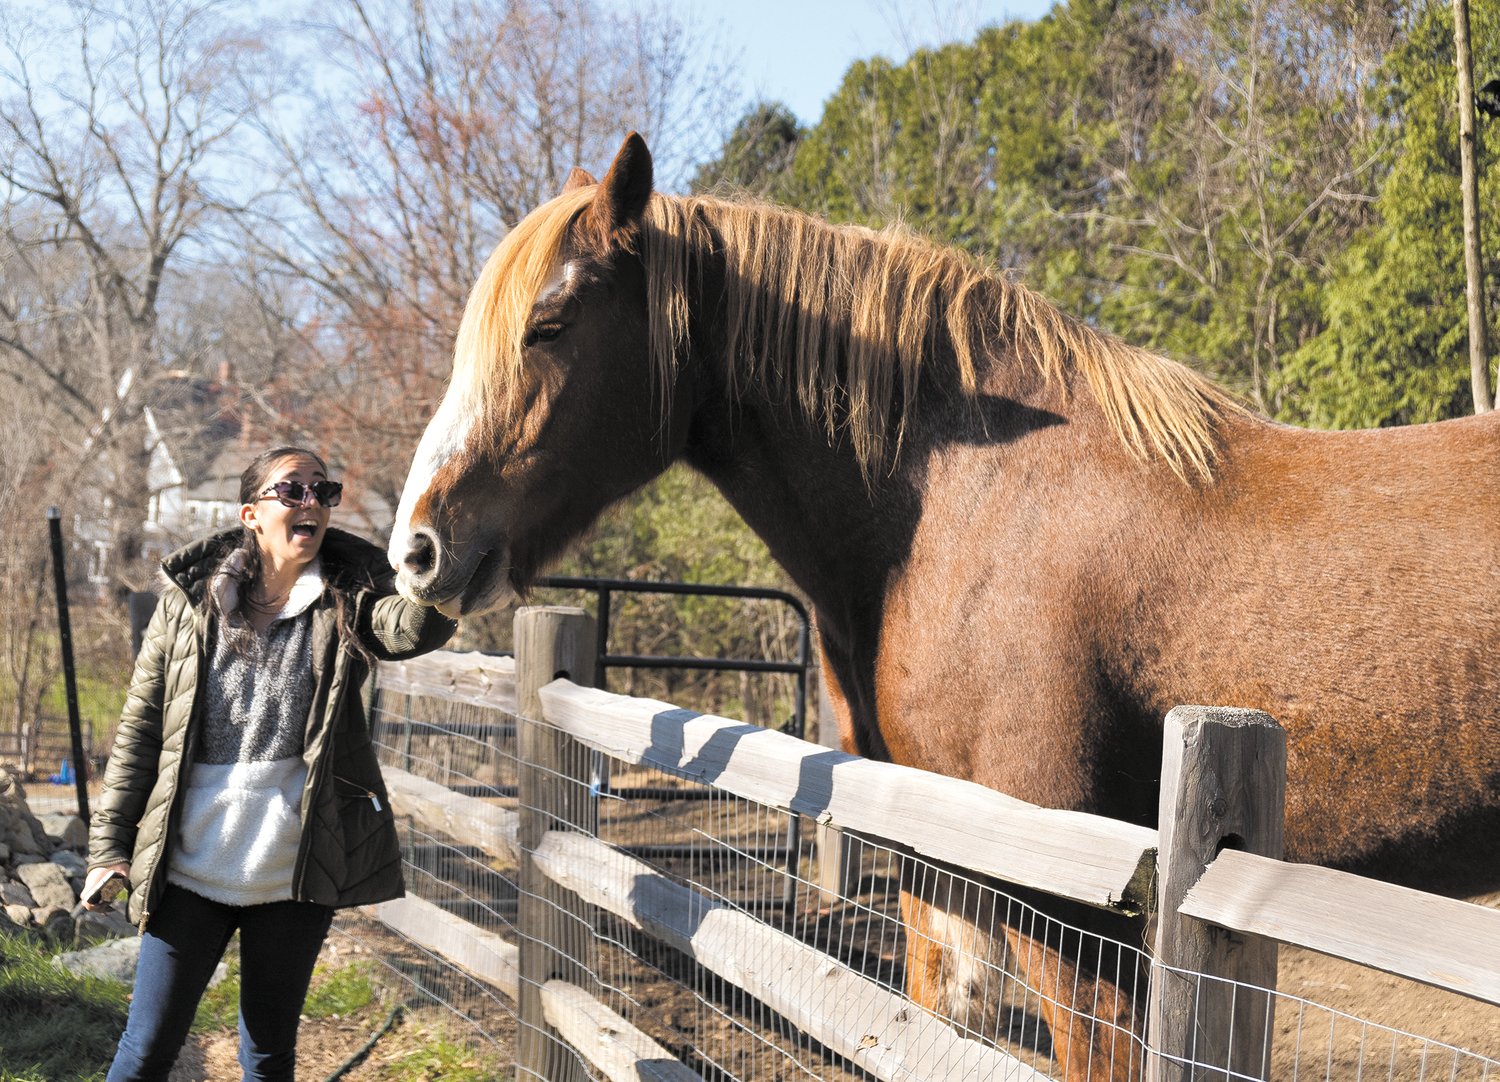 MAKING NEW FRIENDS: Karrina Botelho, a teacher assistant at Stone Hill Elementary School, takes a moment to visit Rosie, one of the farm's five horses, during a field trip to Equi Evolution on Nov. 23.